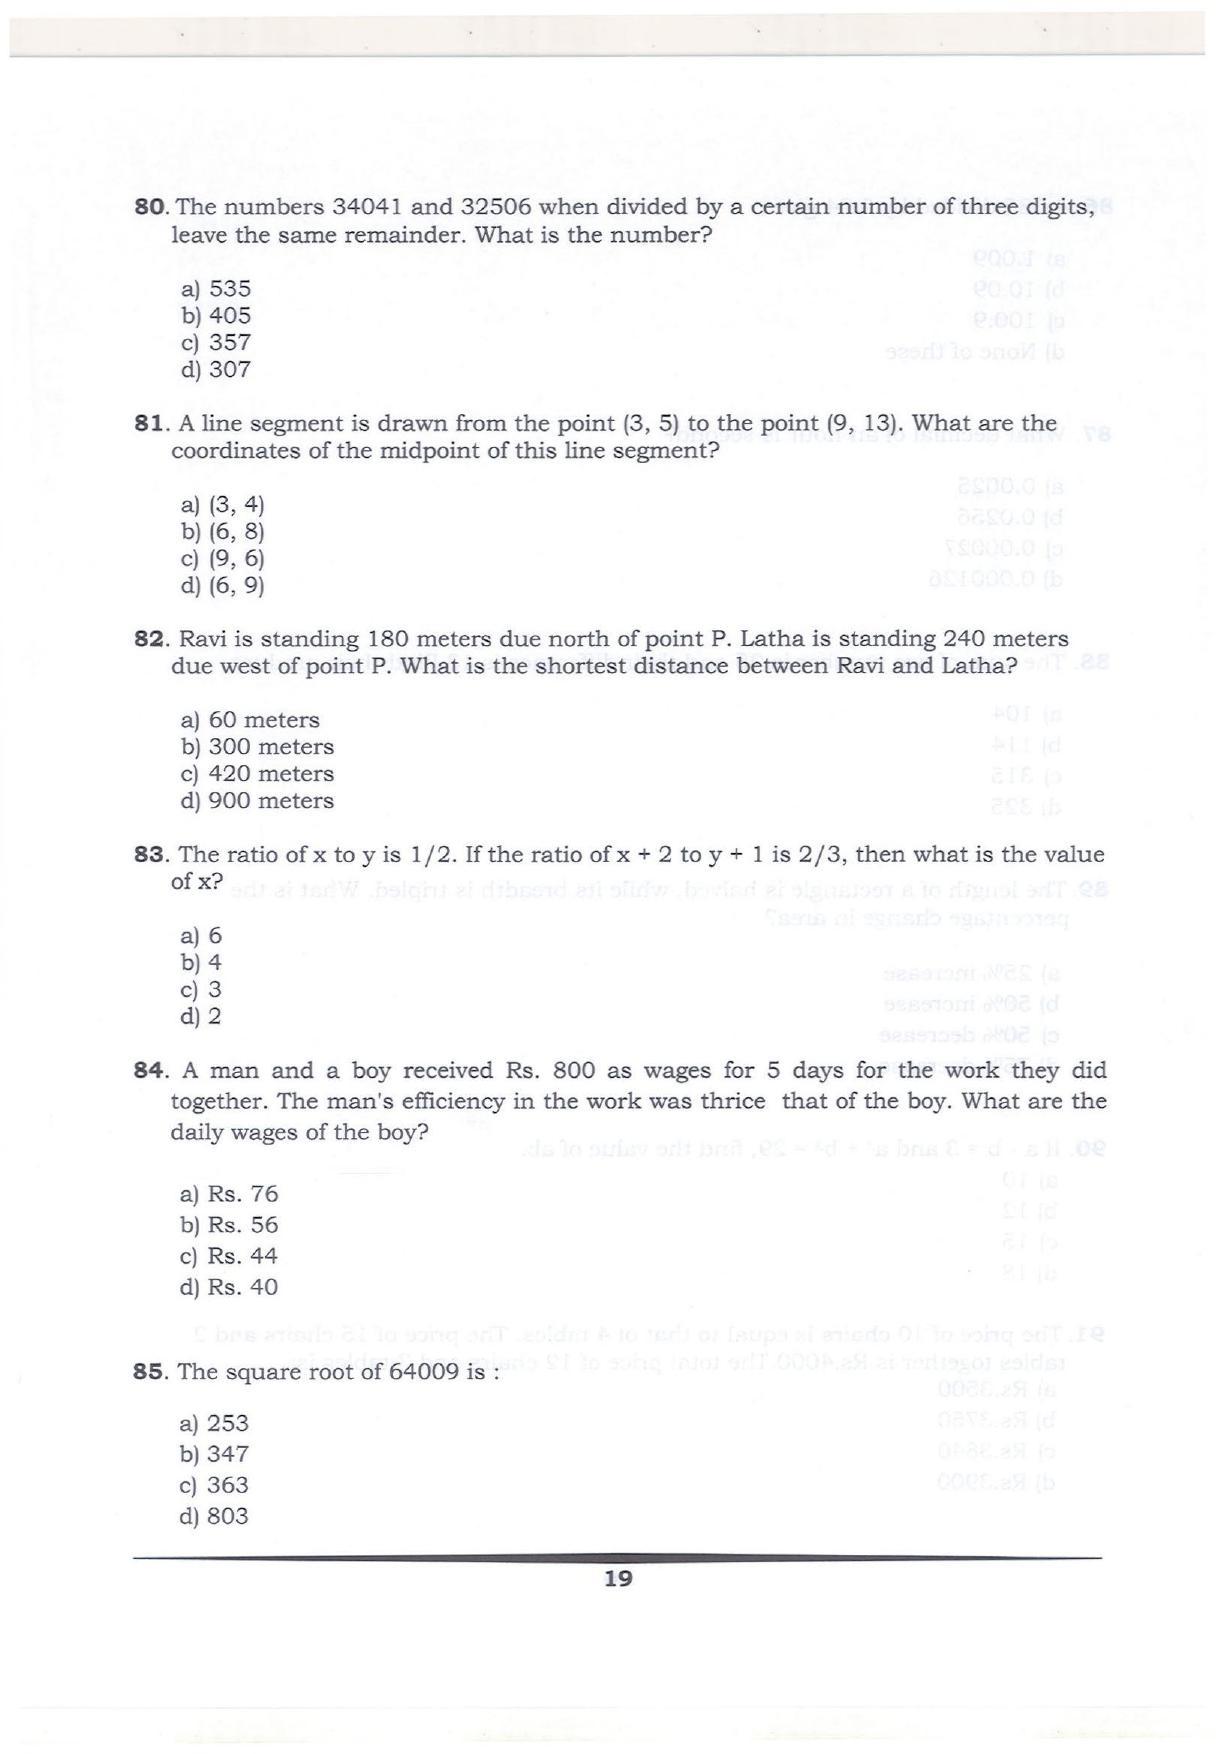 KMAT Question Papers - February 2018 - Page 18